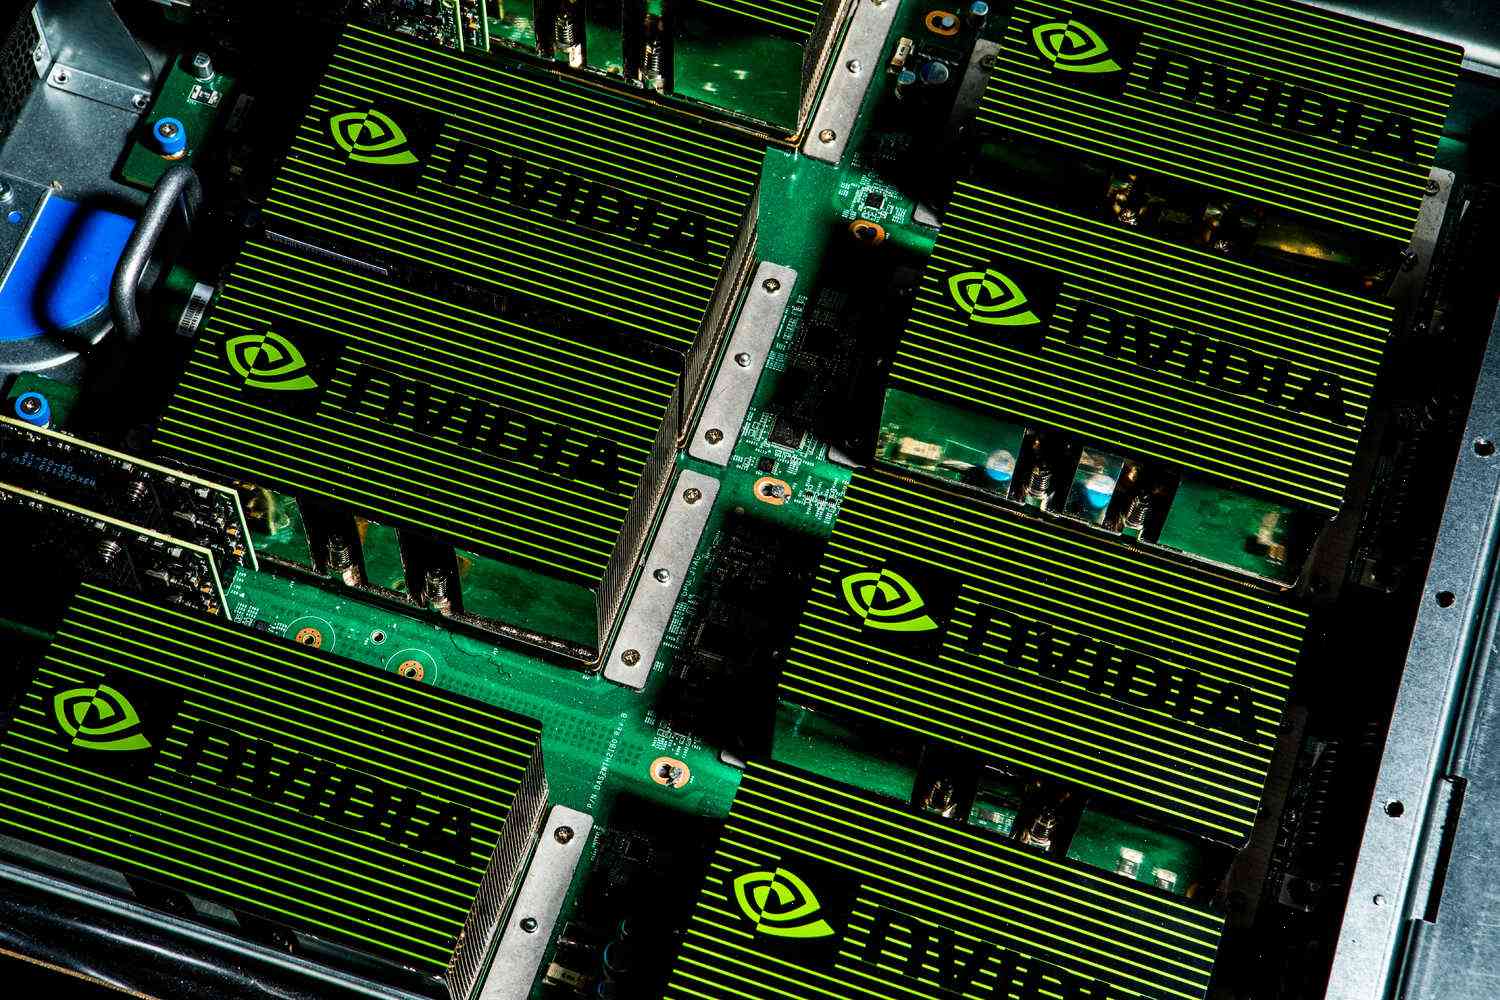 U.S. sues to block Nvidia’s proposed takeover of Arm Holdings